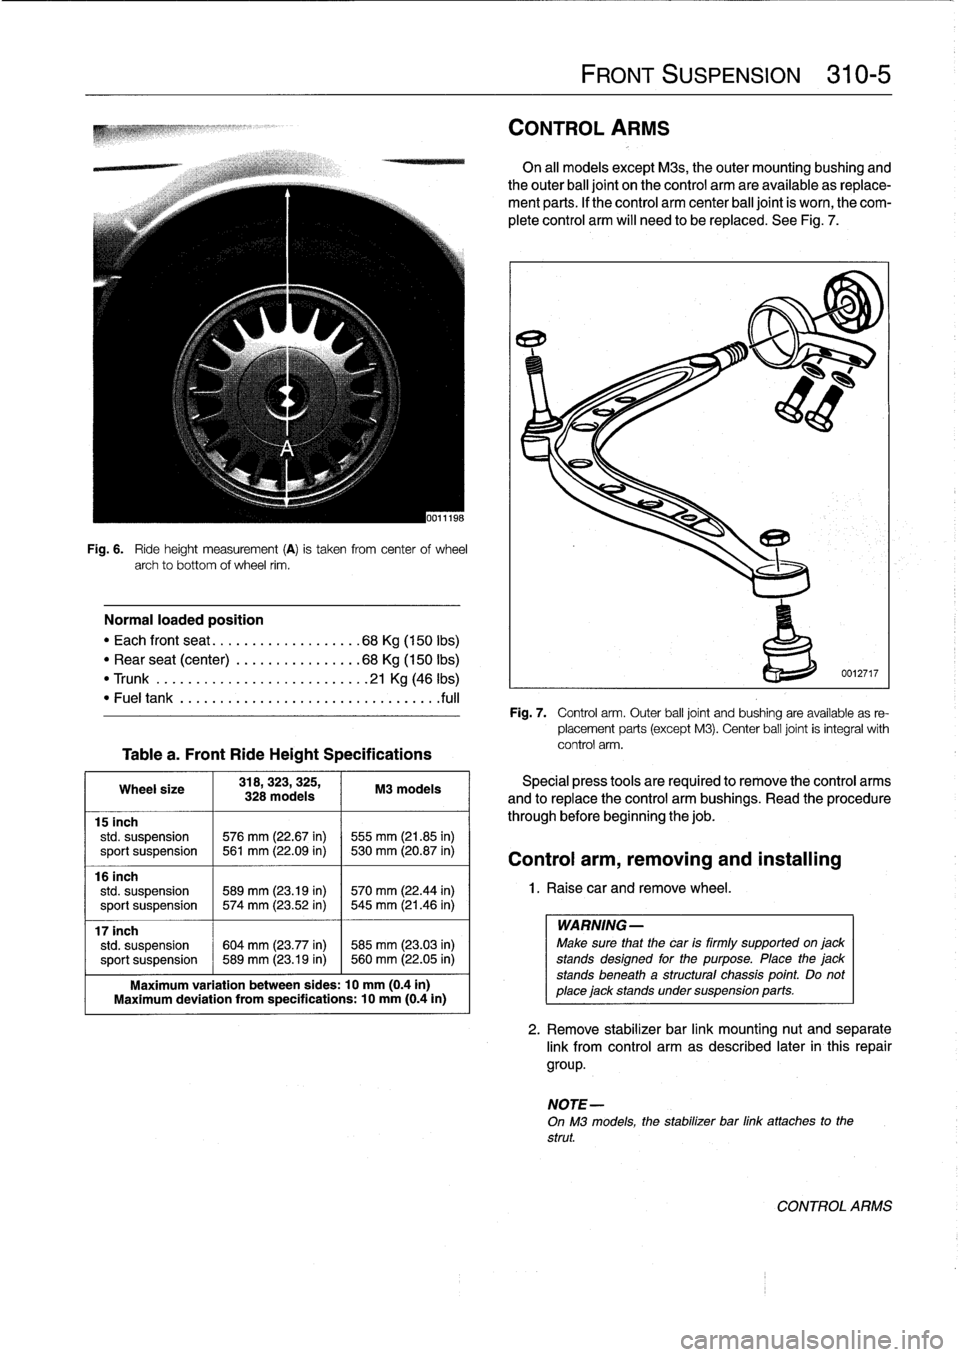 BMW 325i 1994 E36 Workshop Manual 
Fig
.
6
.

	

Ride
height
measurement
(A)
is
taken
from
centerof
wheel
archto
bottom
of
wheel
rim
.

Normal
loaded
position

"
Each
front
seat
...
...
.
..
..........
68Kg
(150
Ibs)

"
Rear
seat
(cen